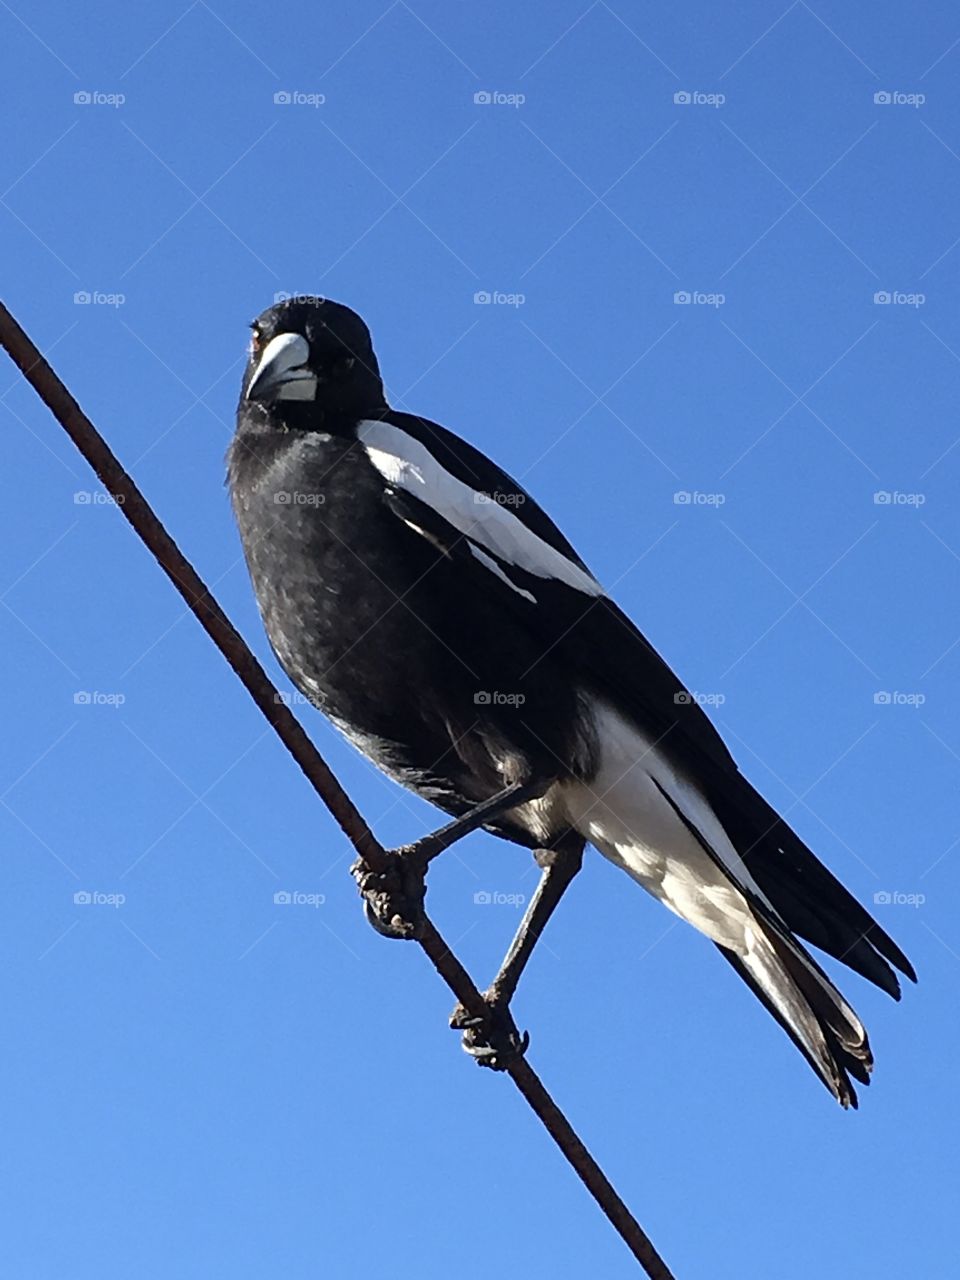 Closeup, Australian magpie on a wire against a vivid blue sky, excellent contrast, detail, side view plumage and profile full body shot